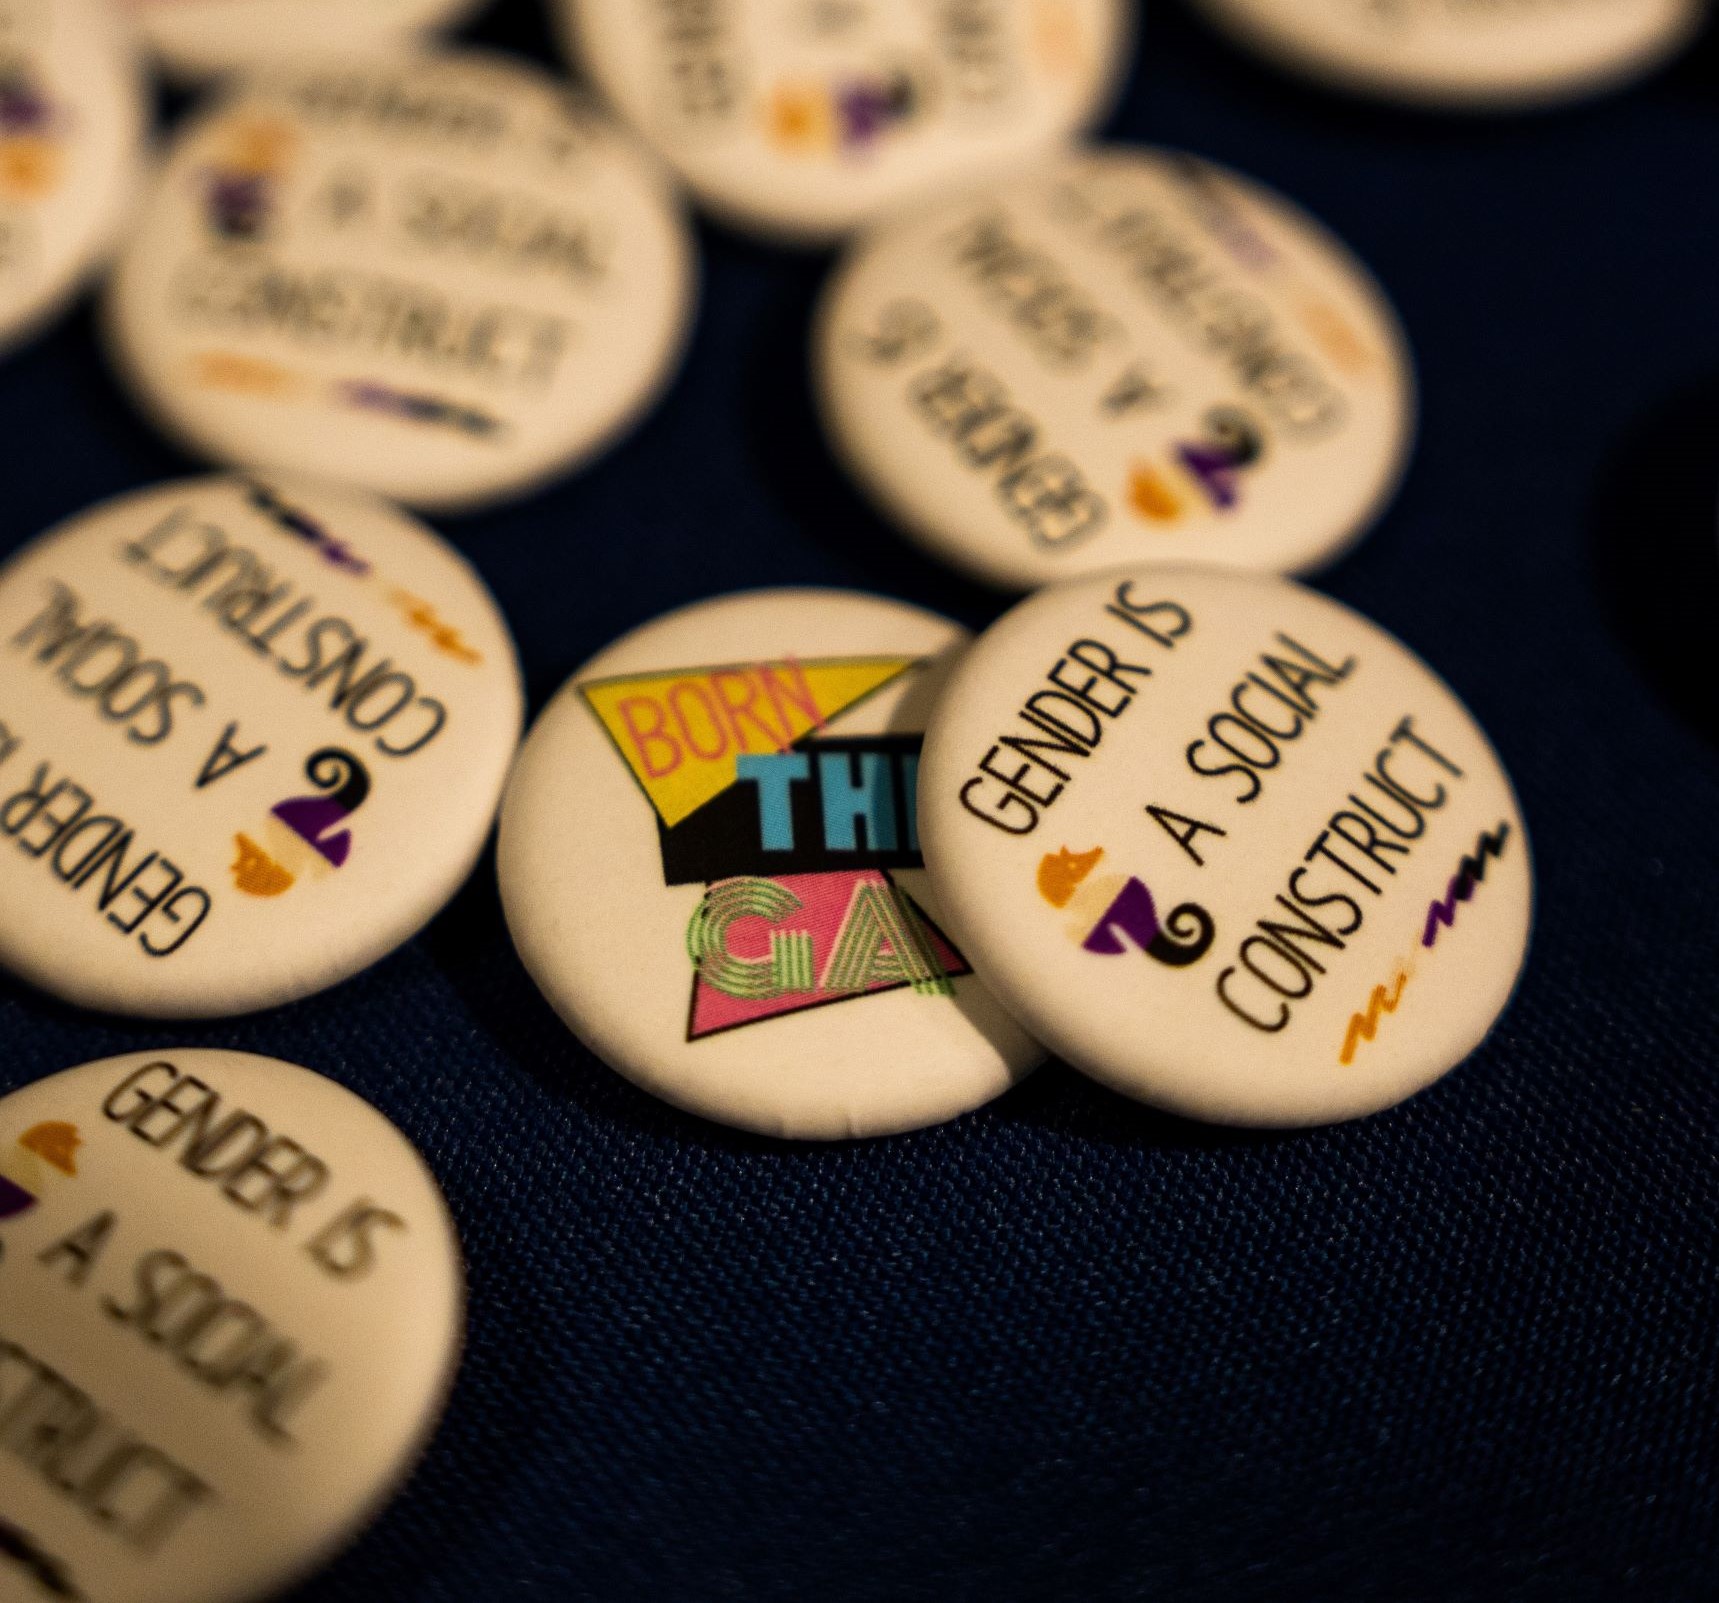 A picture of a pile of pins on a black background. The pins say "GENDER IS A SOCIAL CONSTRUCT" and "BORN THIS GAY"